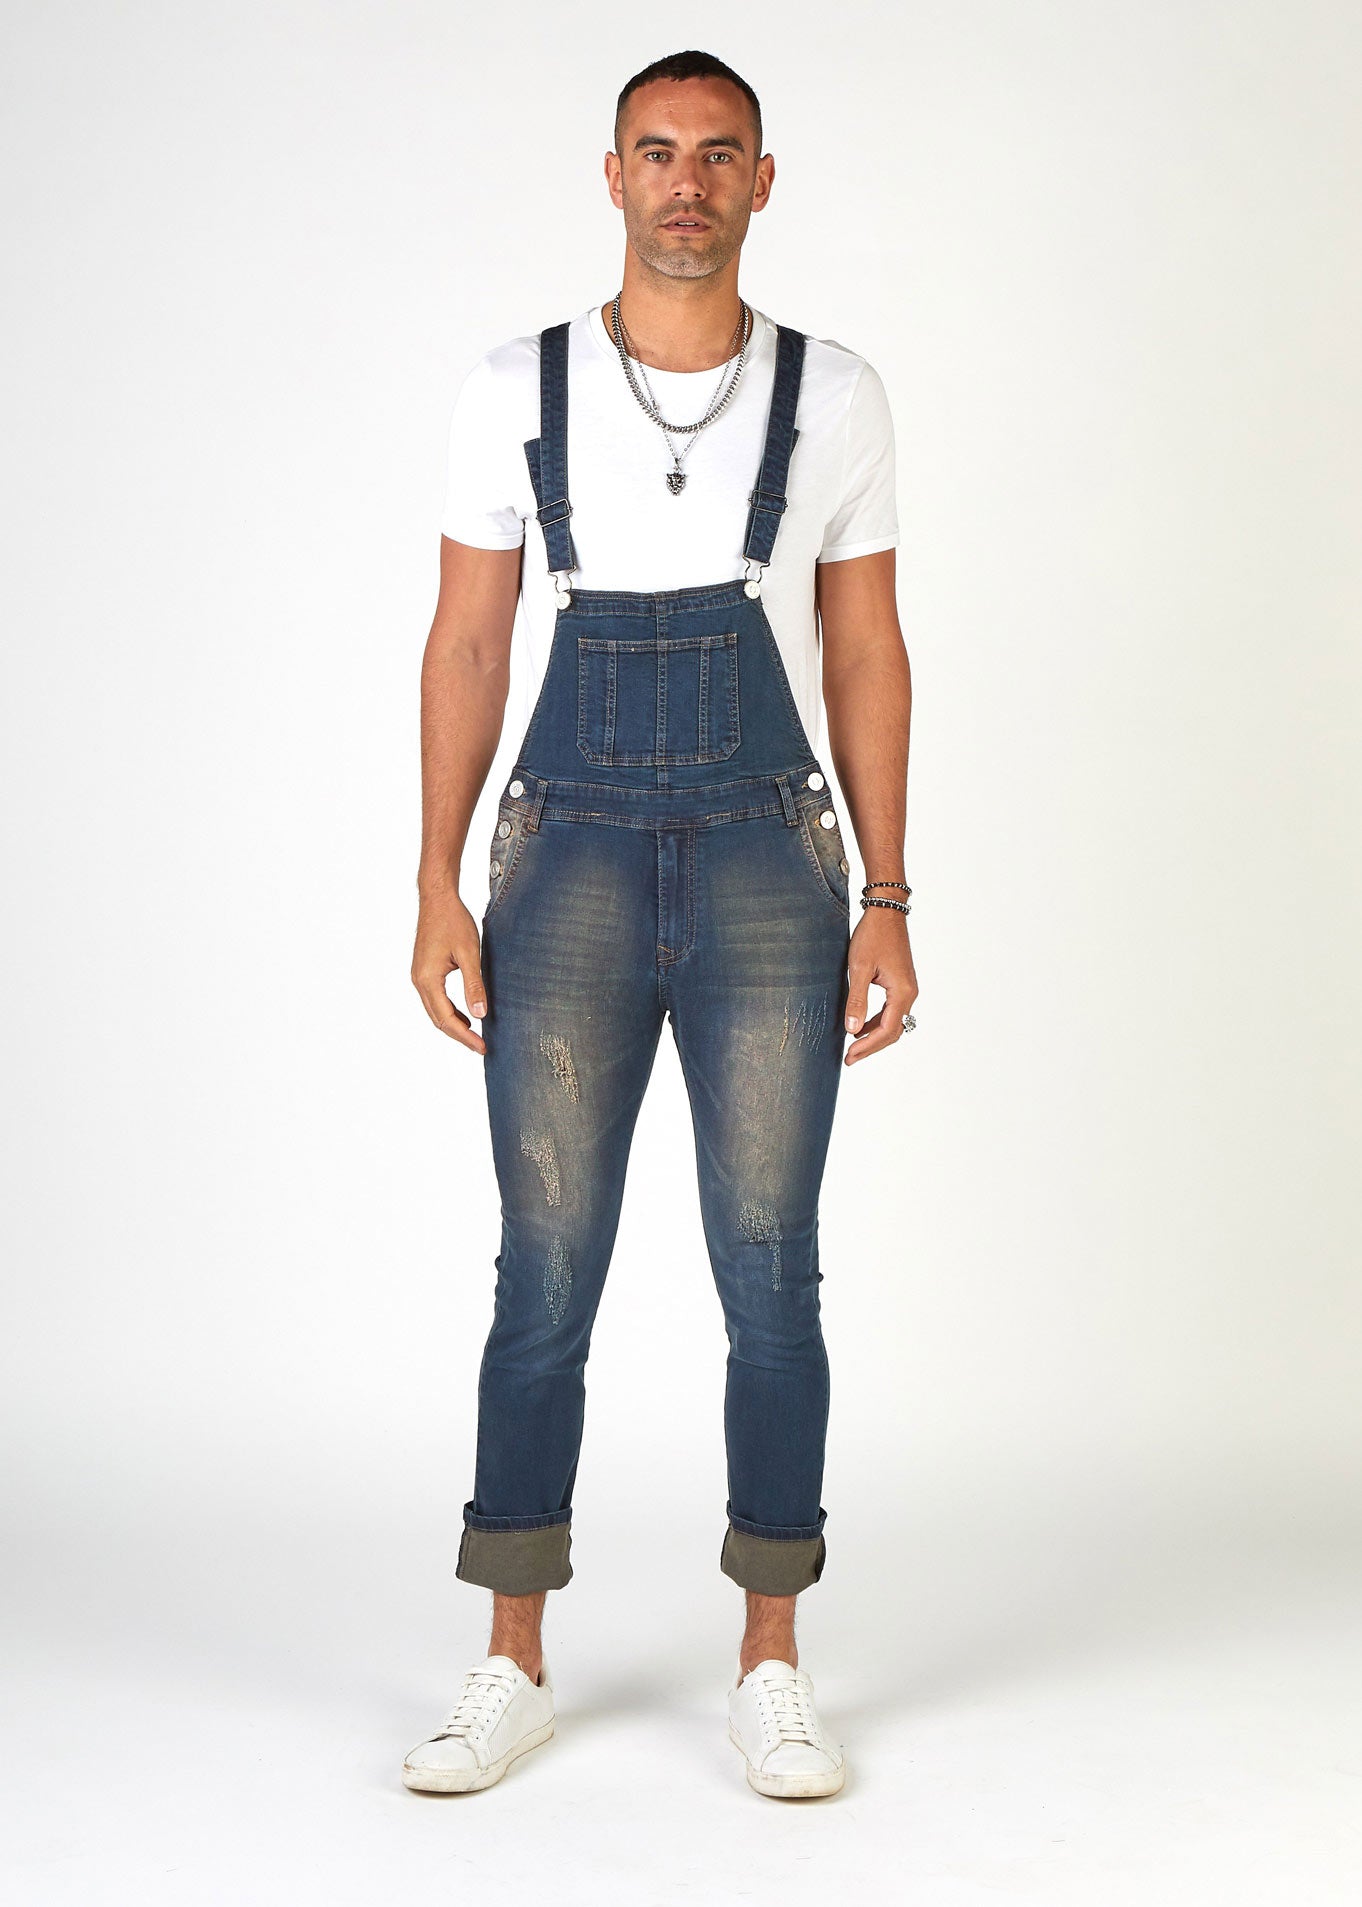 Full-front pose showing skinny fit style of men's denim dungarees with abrasions. Styled with legs turned up.